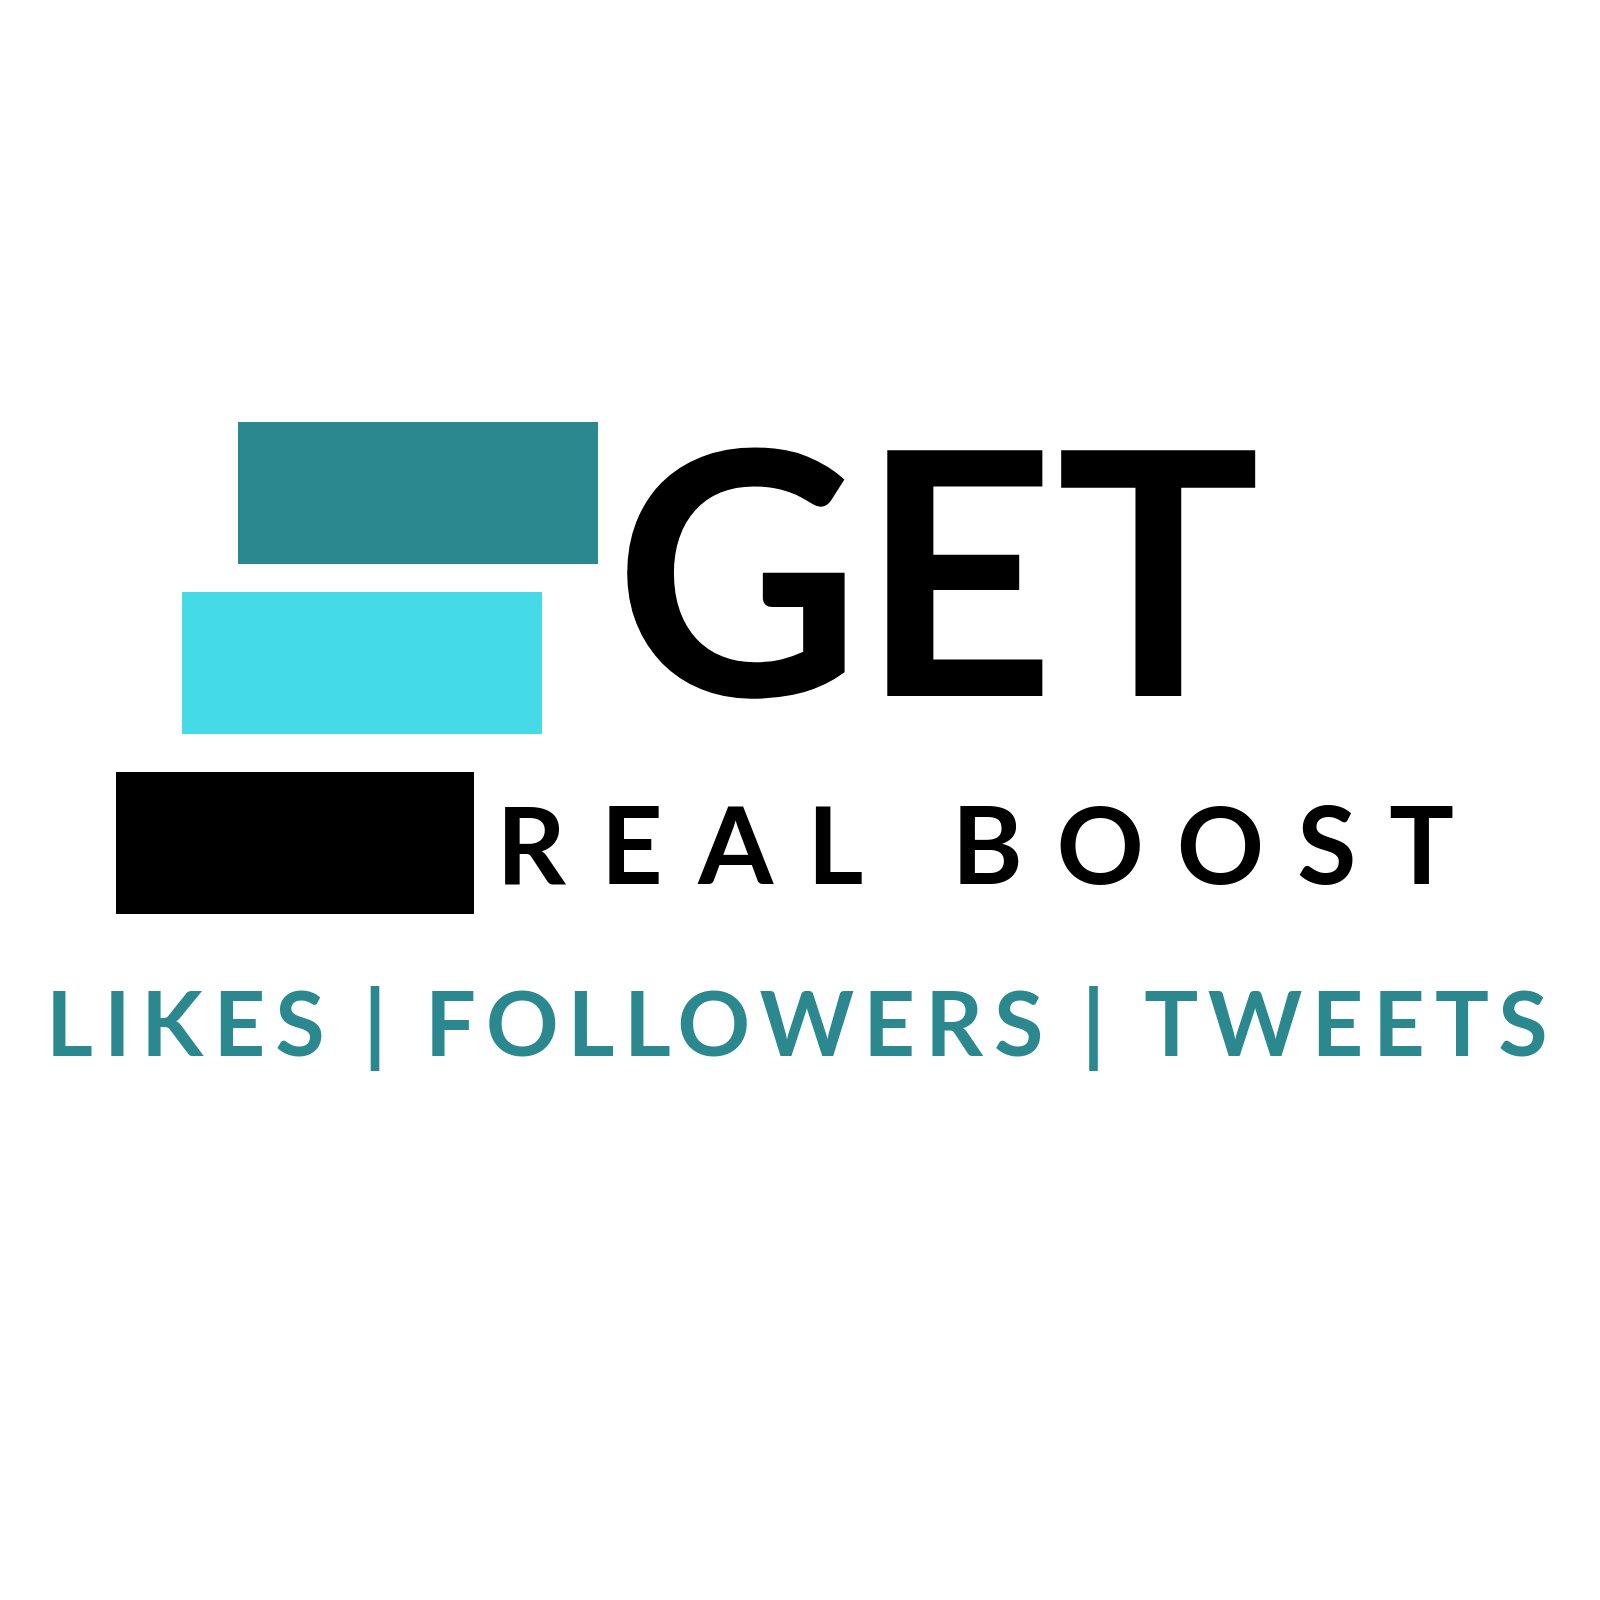 Get real boost is the leading social media marketing company dedicated to make your social media marketing convertible and convenient. We sell genuine followers